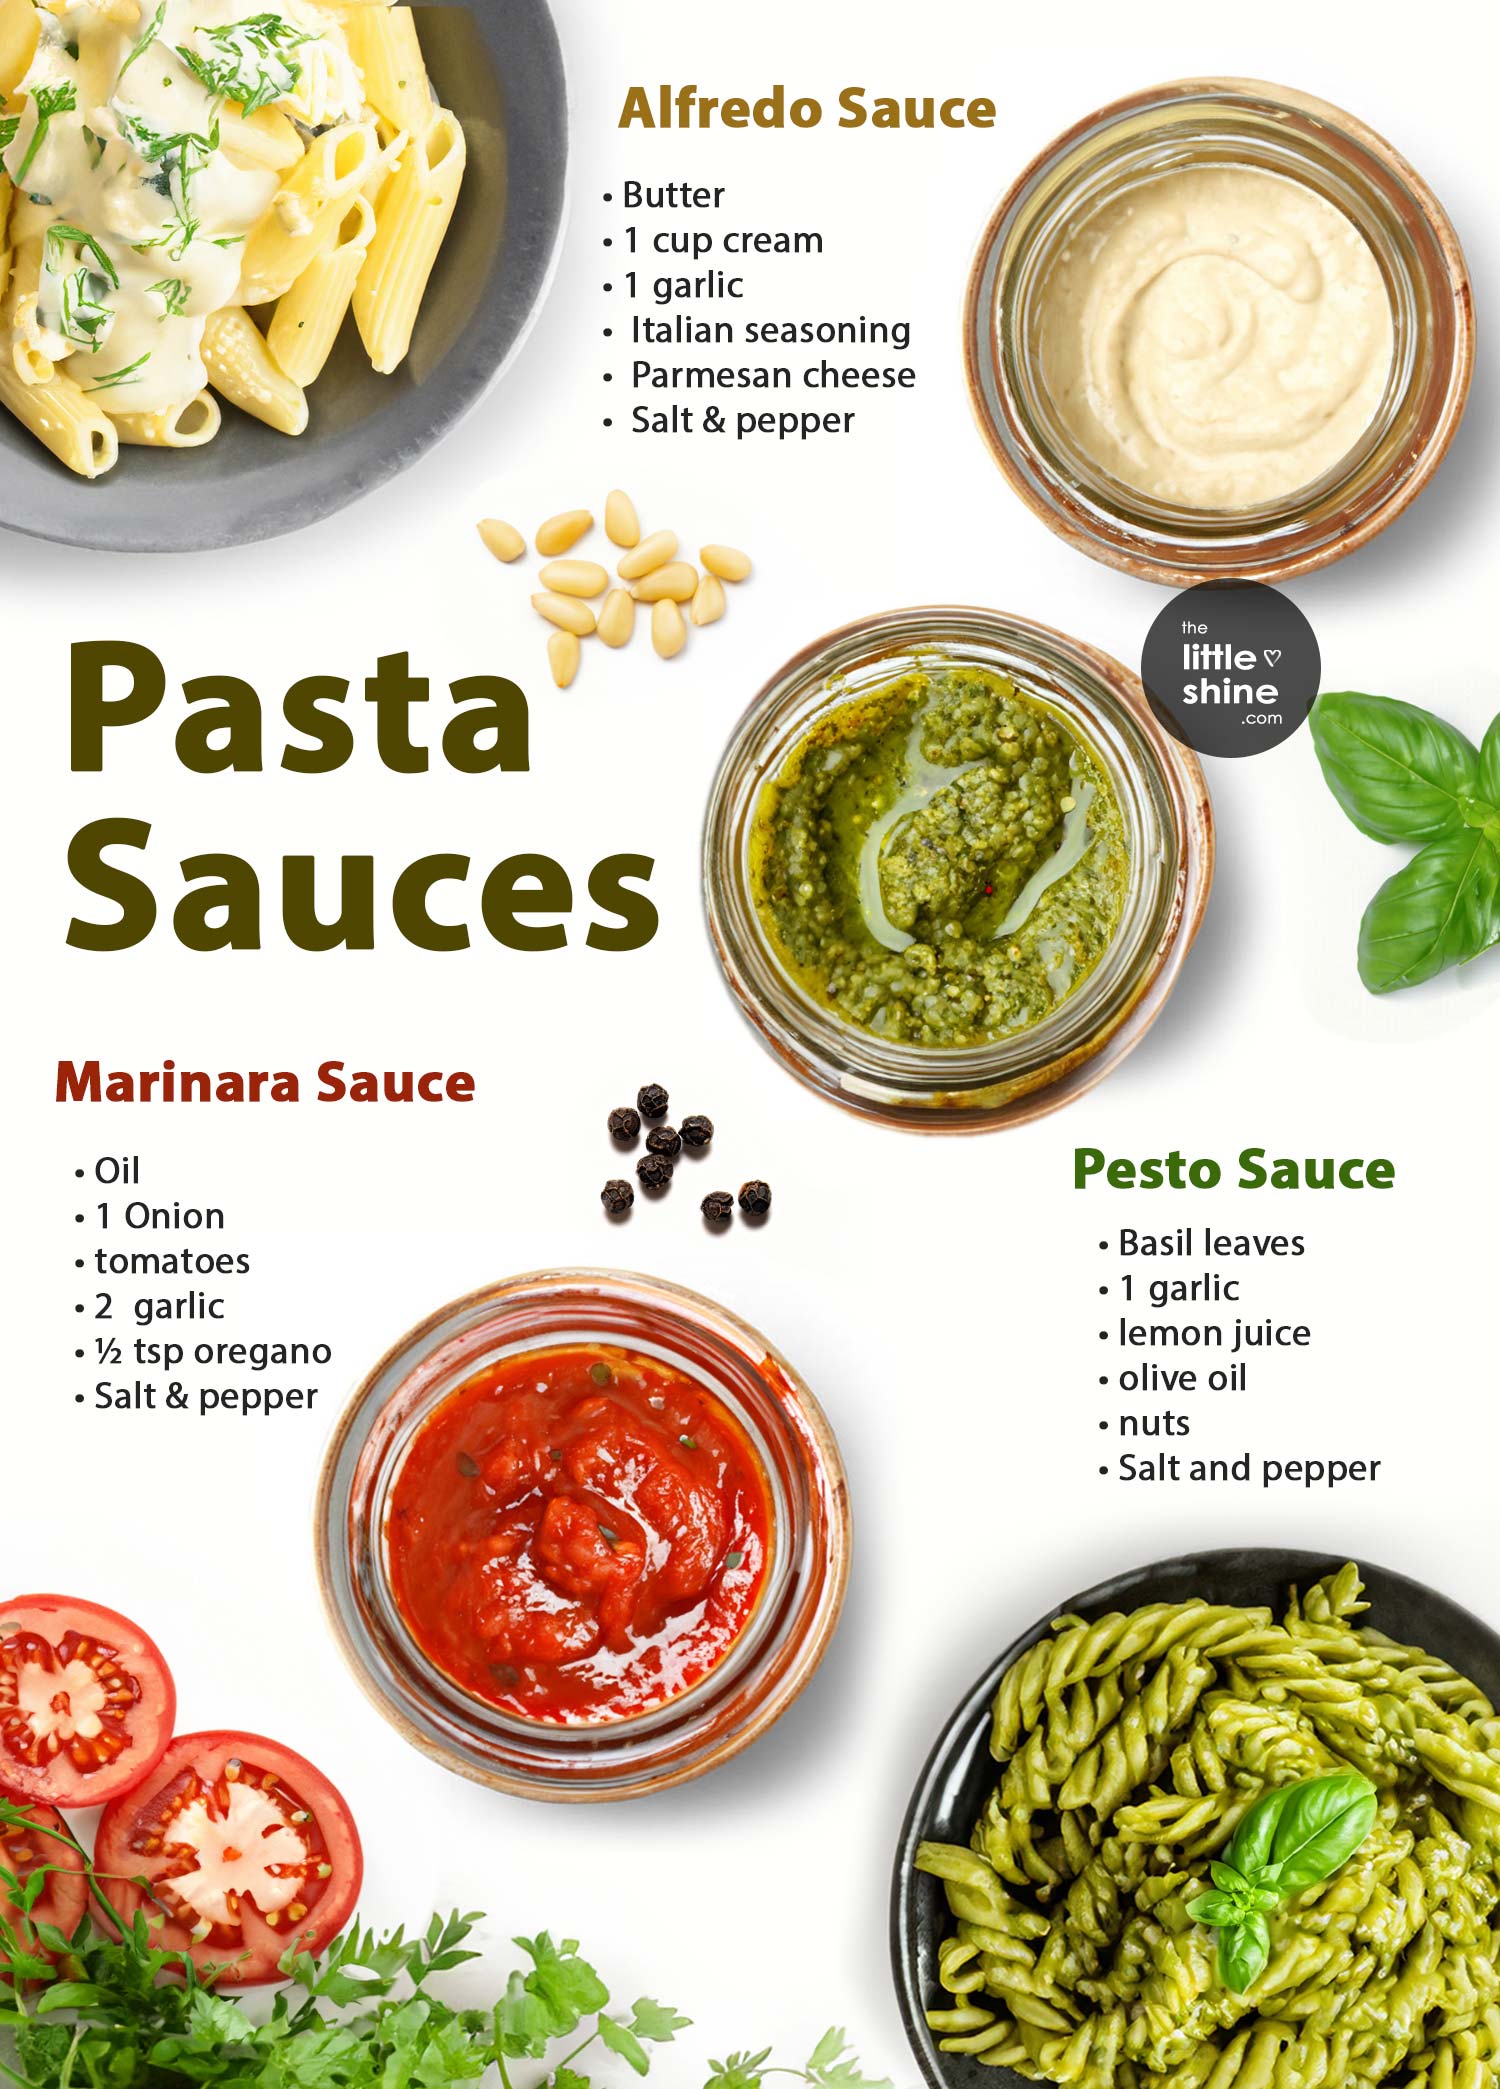 6 types of pasta sauce one needs to know about